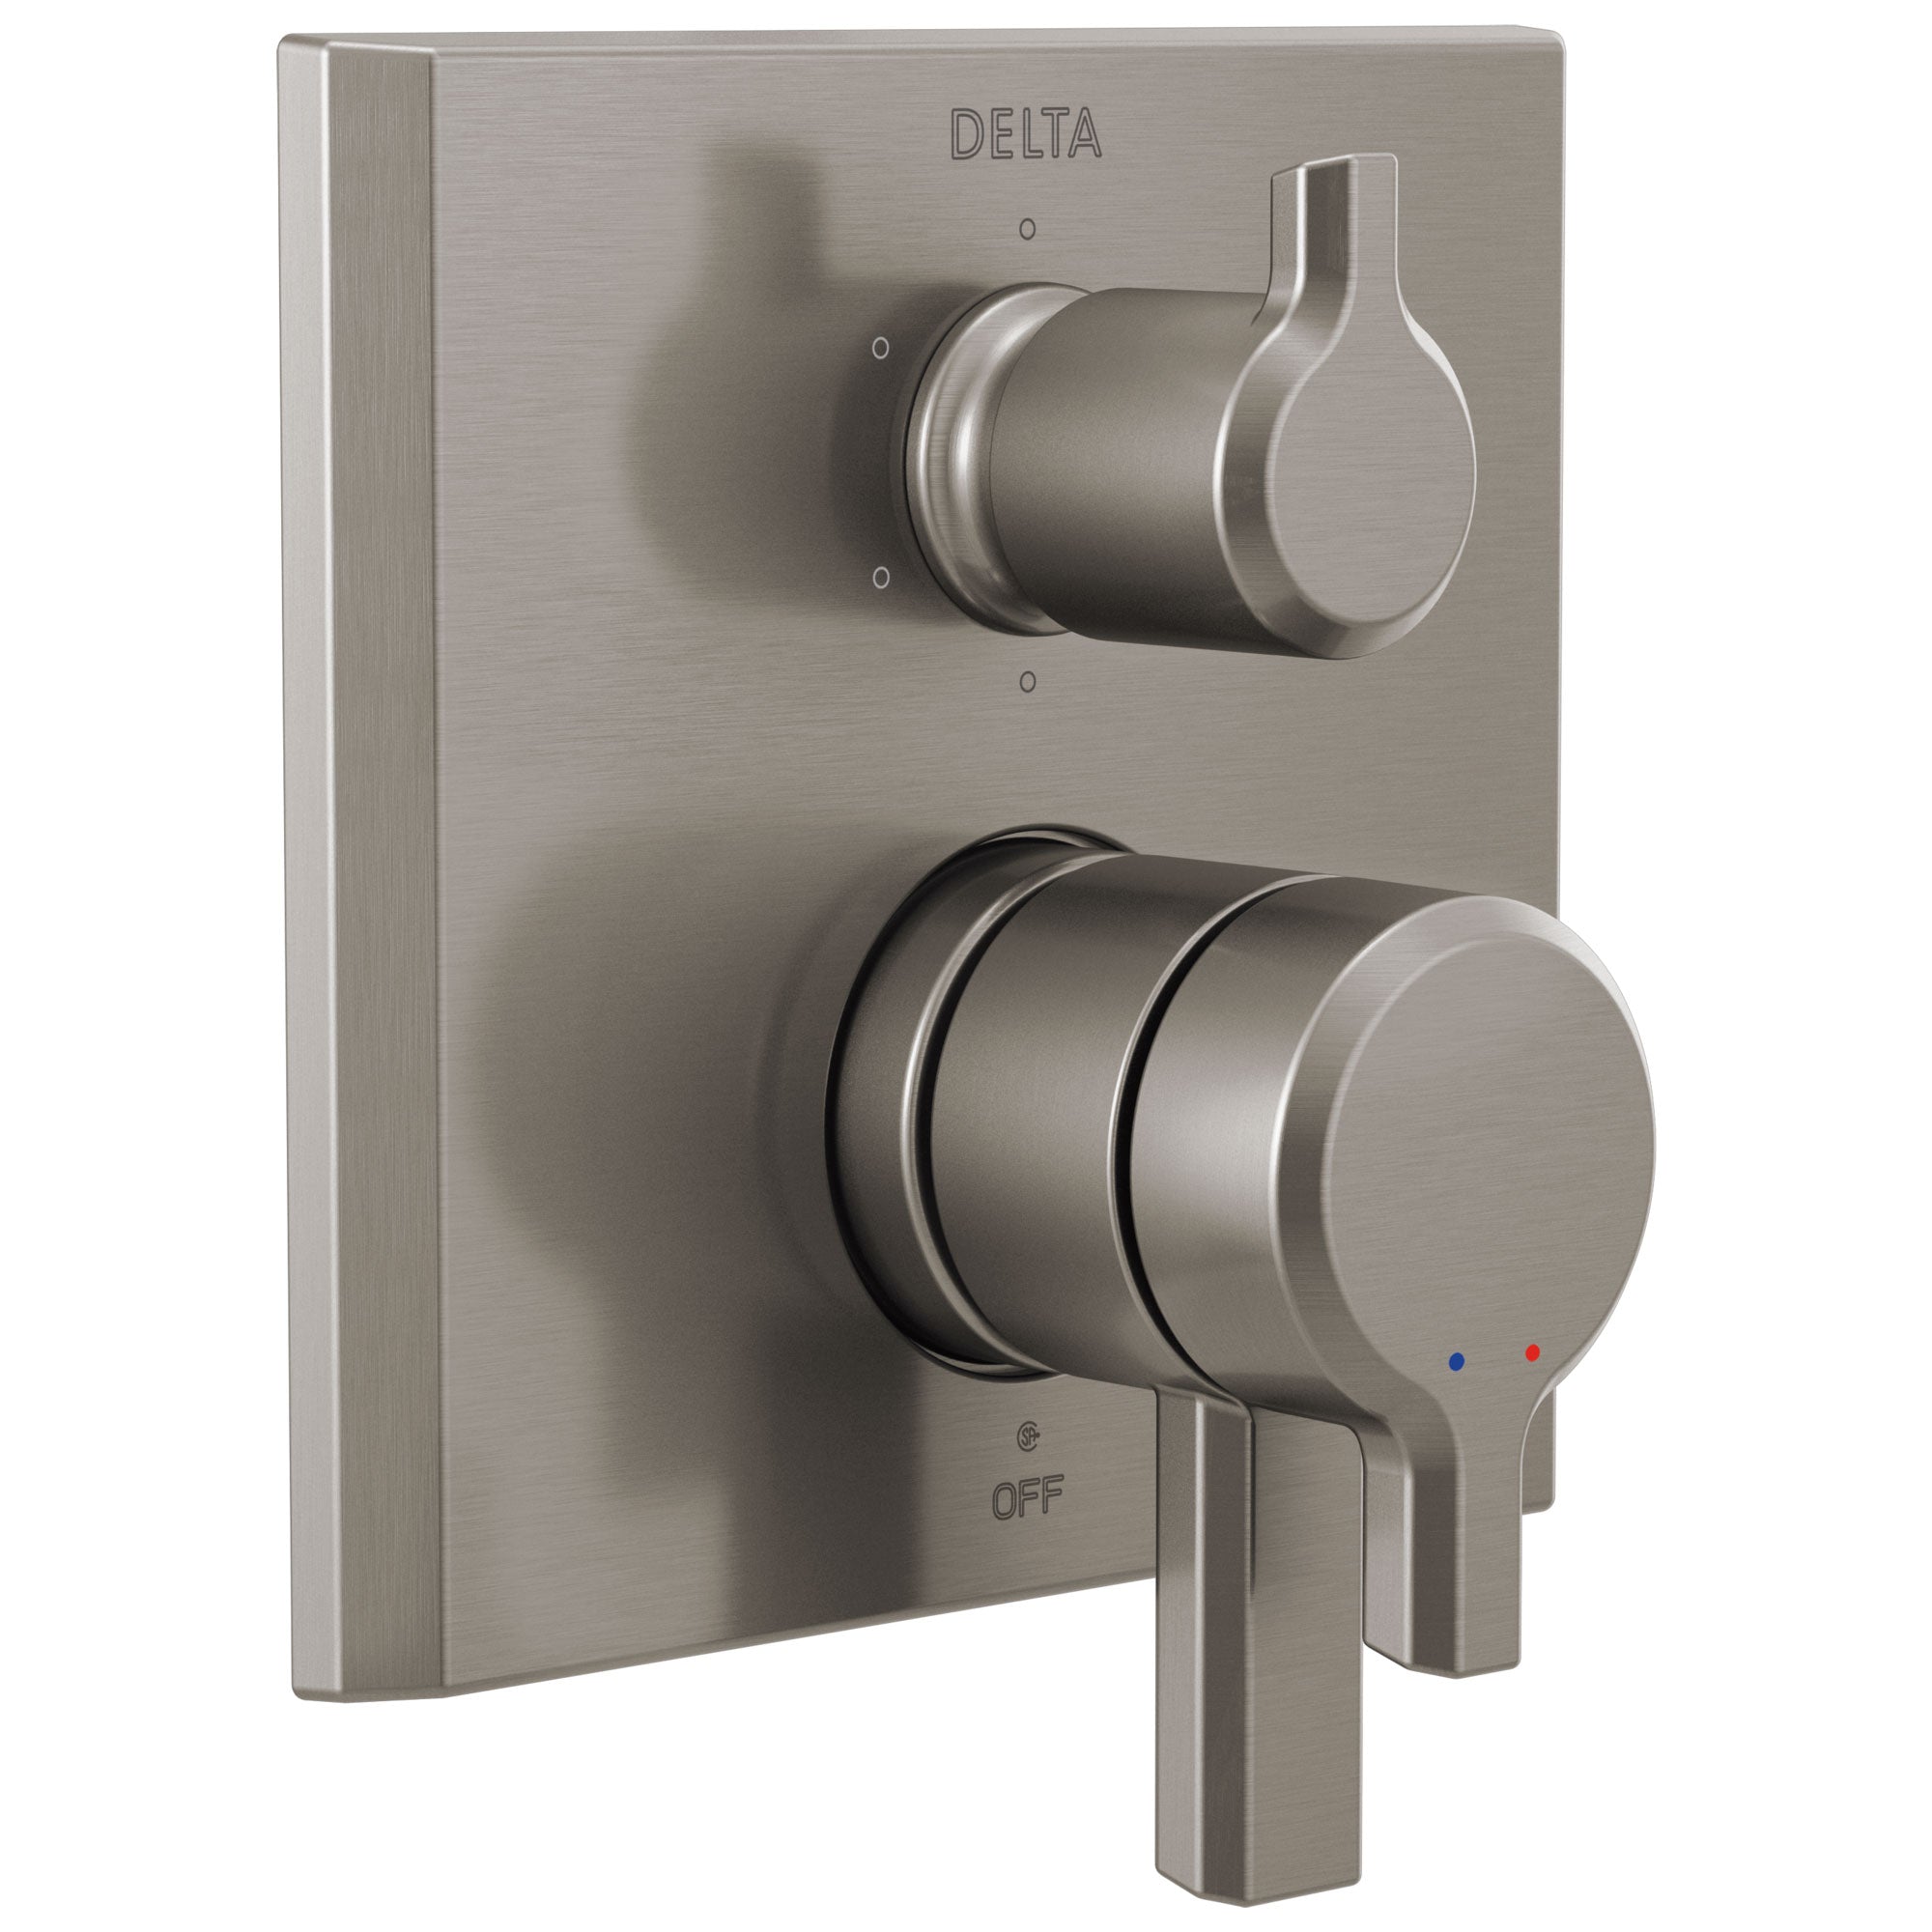 Delta Pivotal Stainless Steel Finish Monitor 17 Series Shower Control Trim Kit with 6-Setting Diverter (Requires Valve) DT27999SS